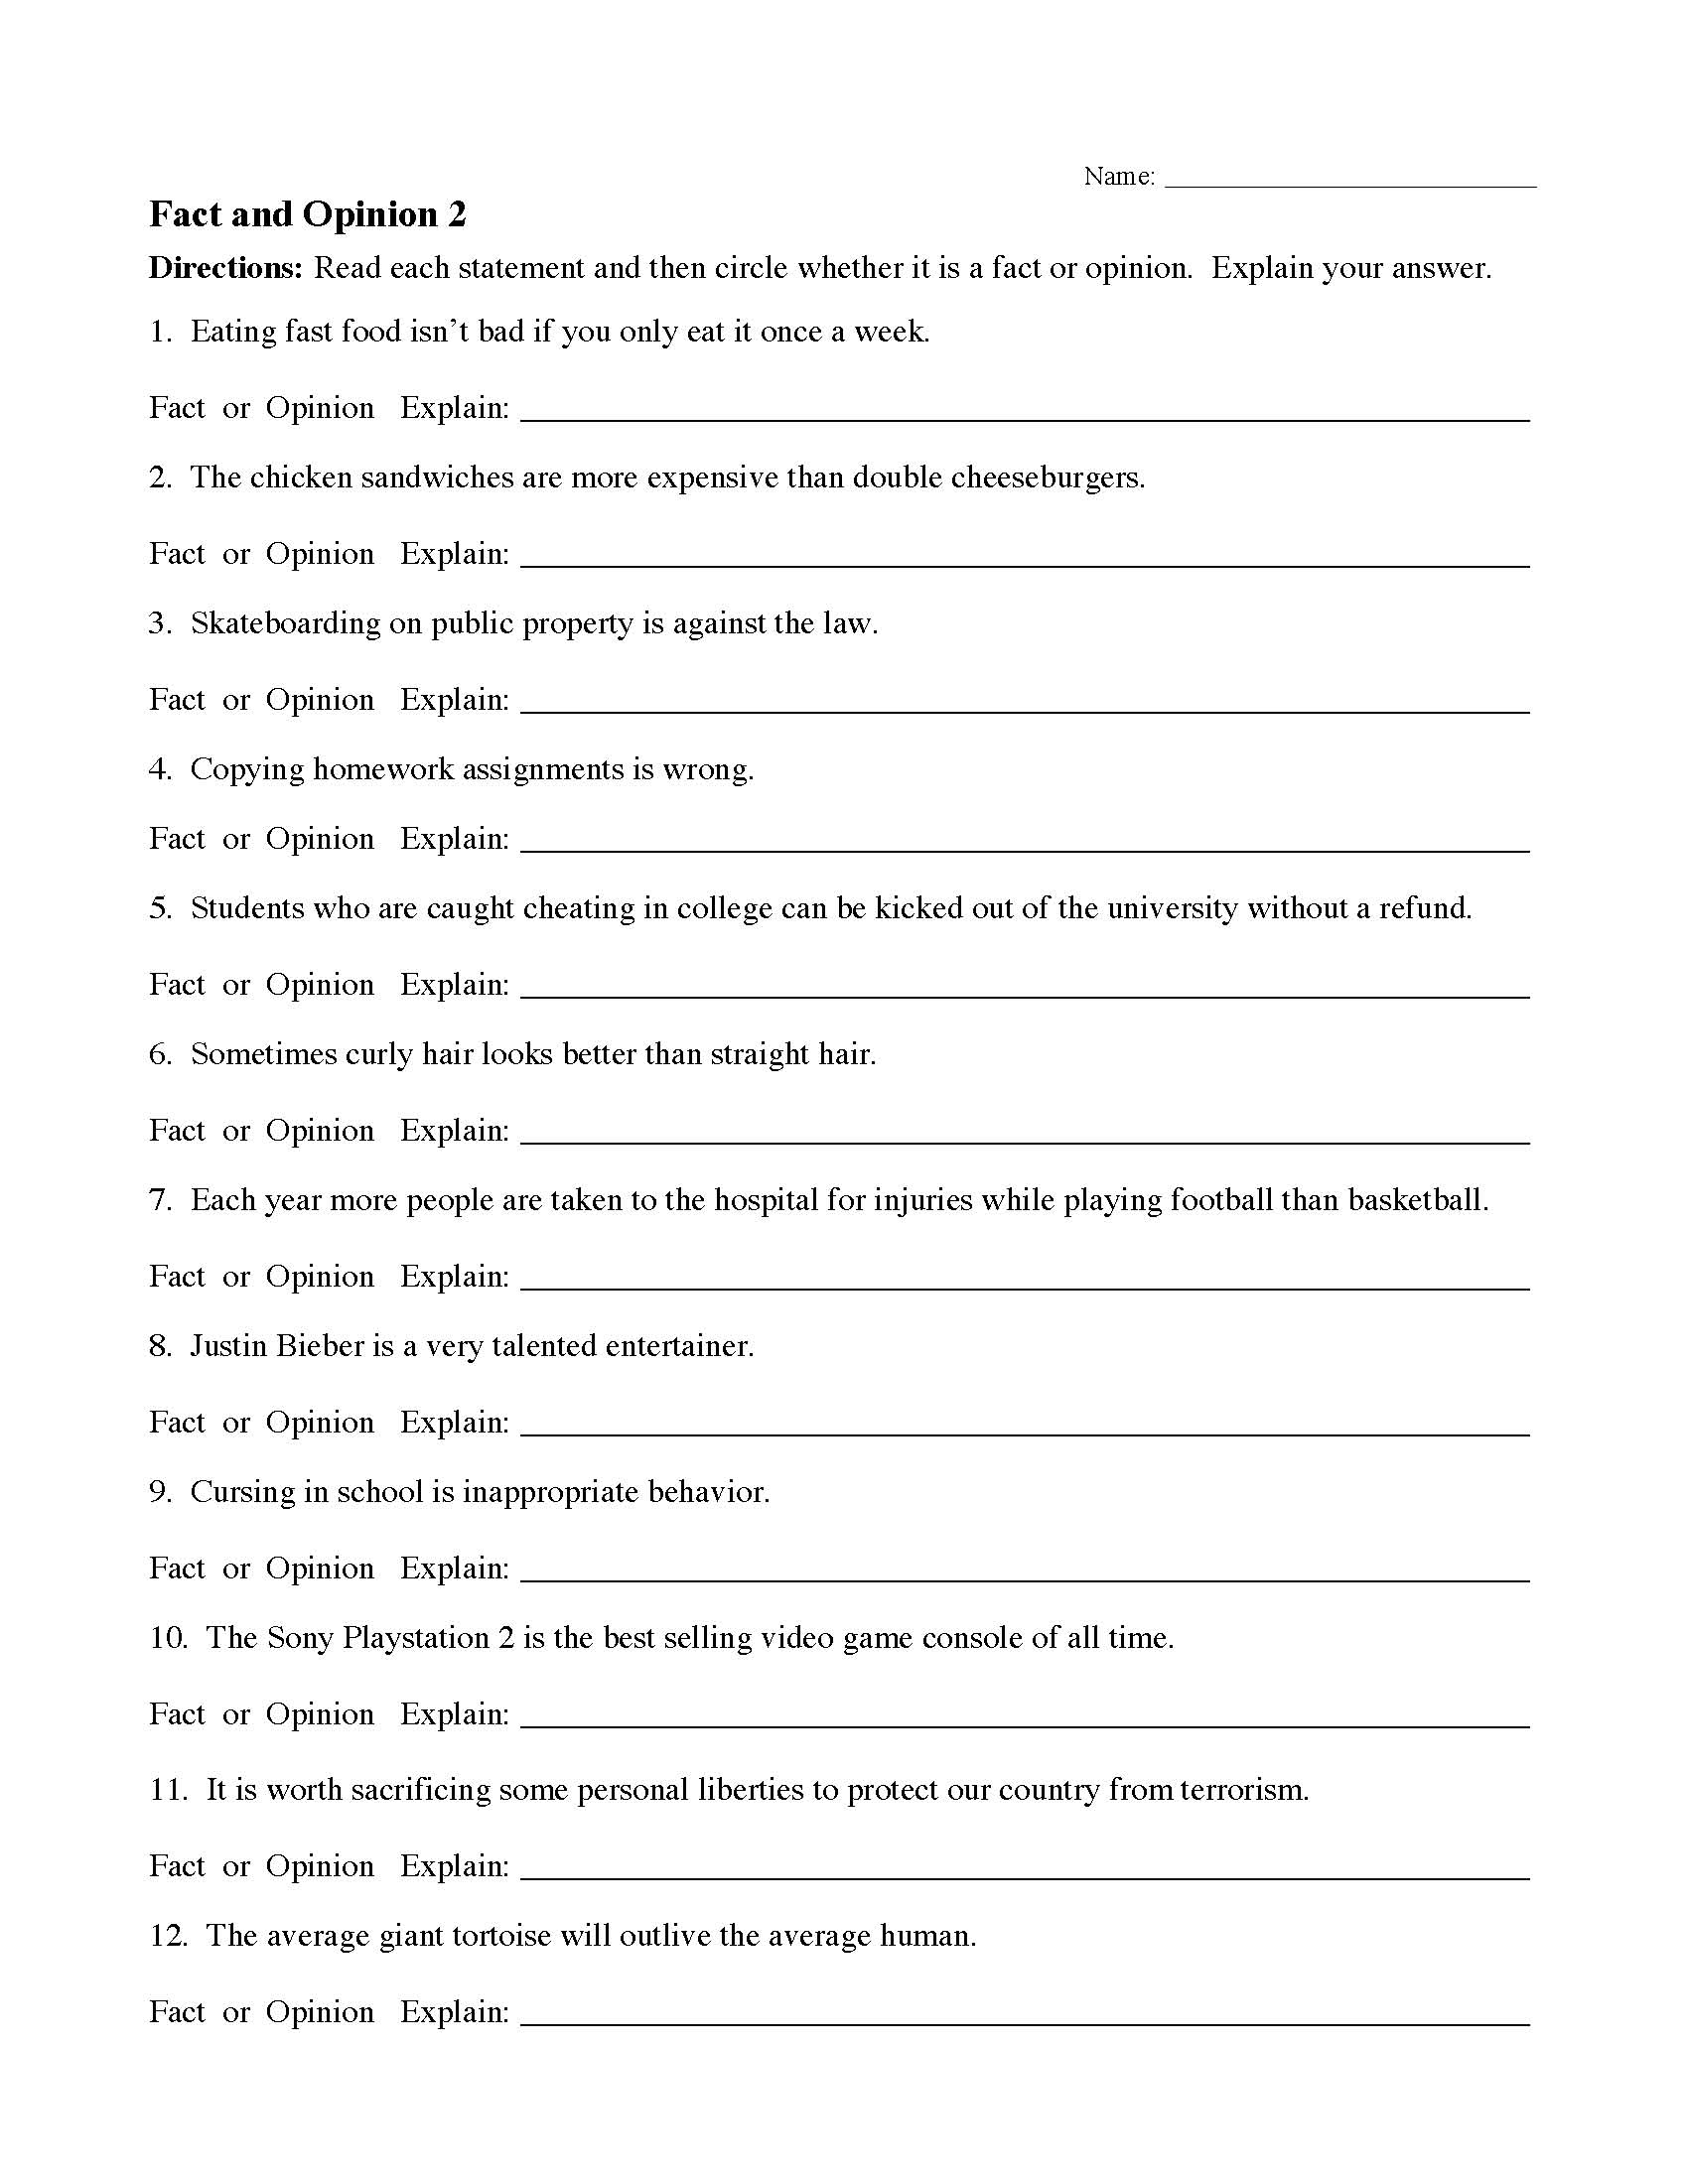 fact-and-opinion-worksheet-2-preview